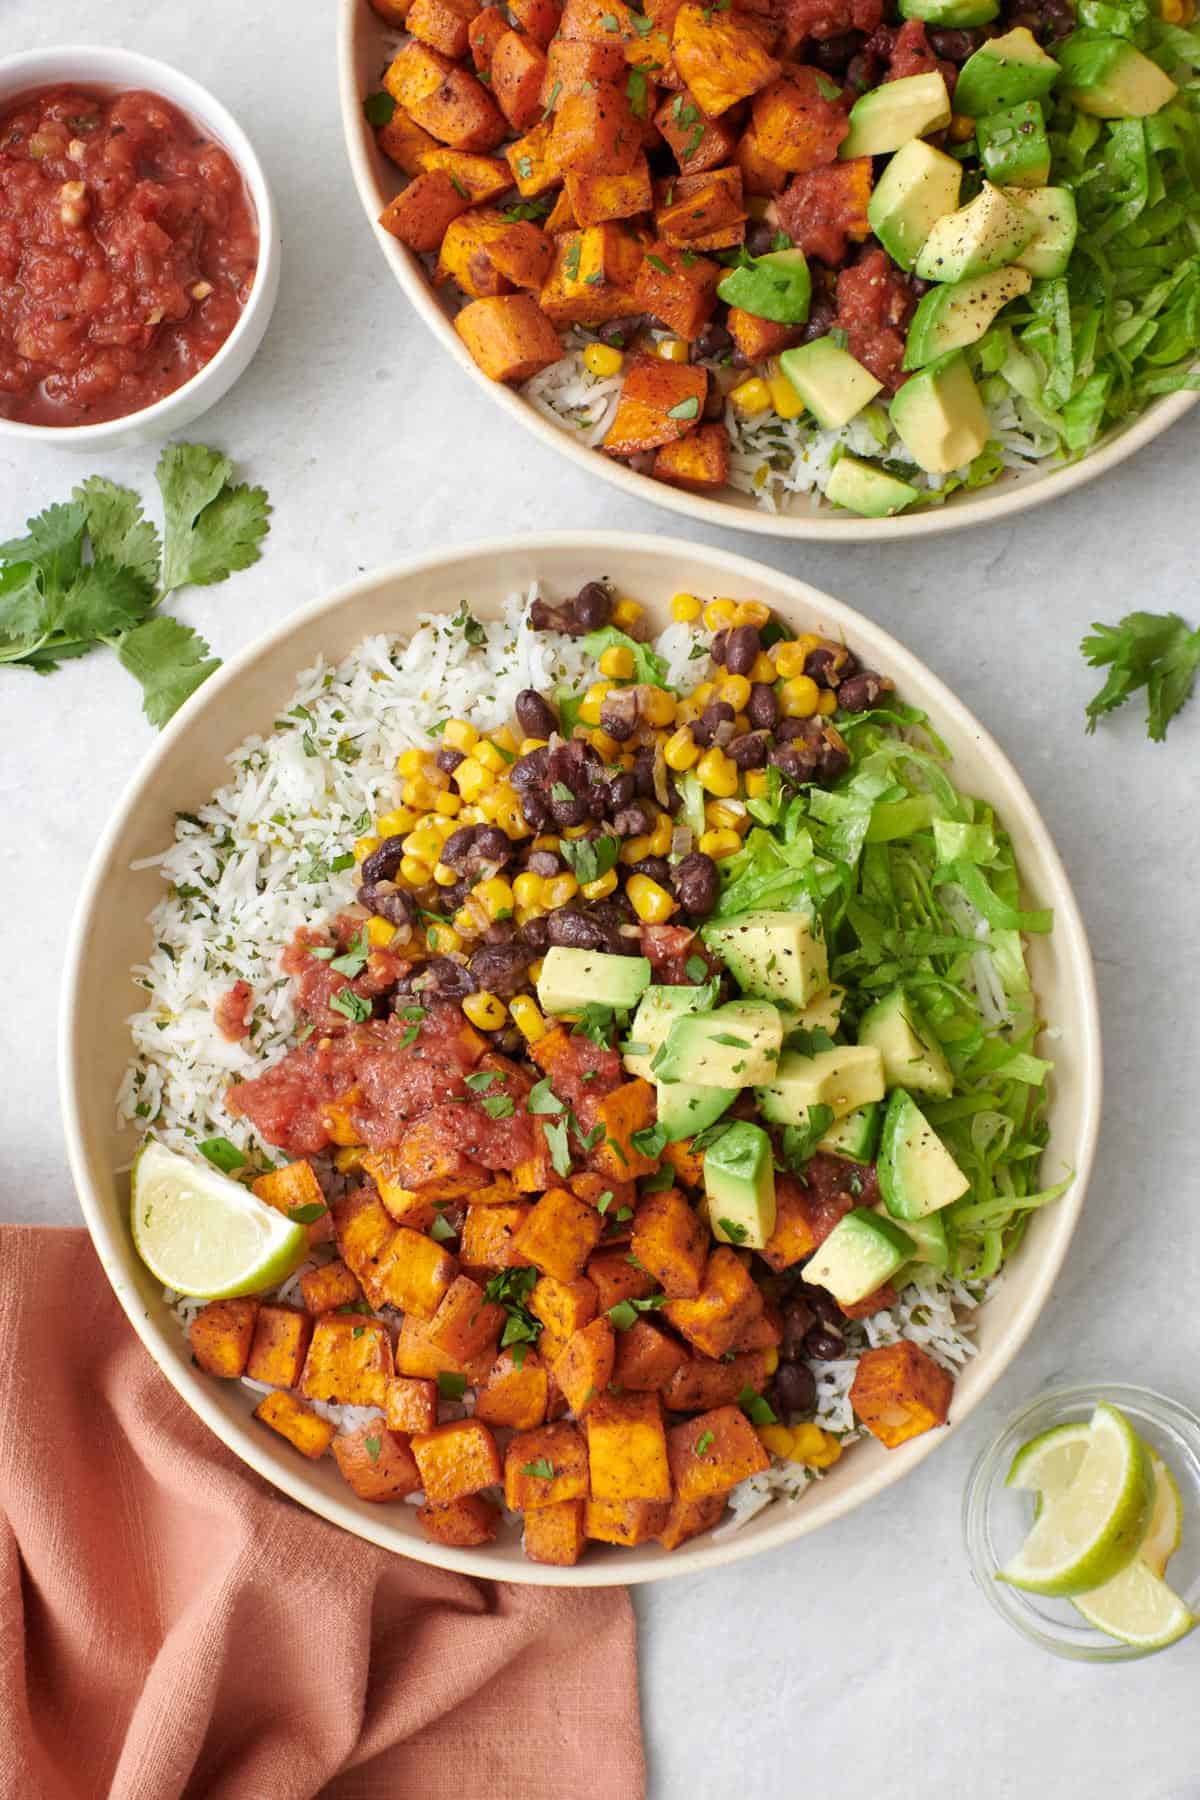 Two Vegetarian burrito bowls with cilantro lime rice, avocado, lettuce, and salsa.